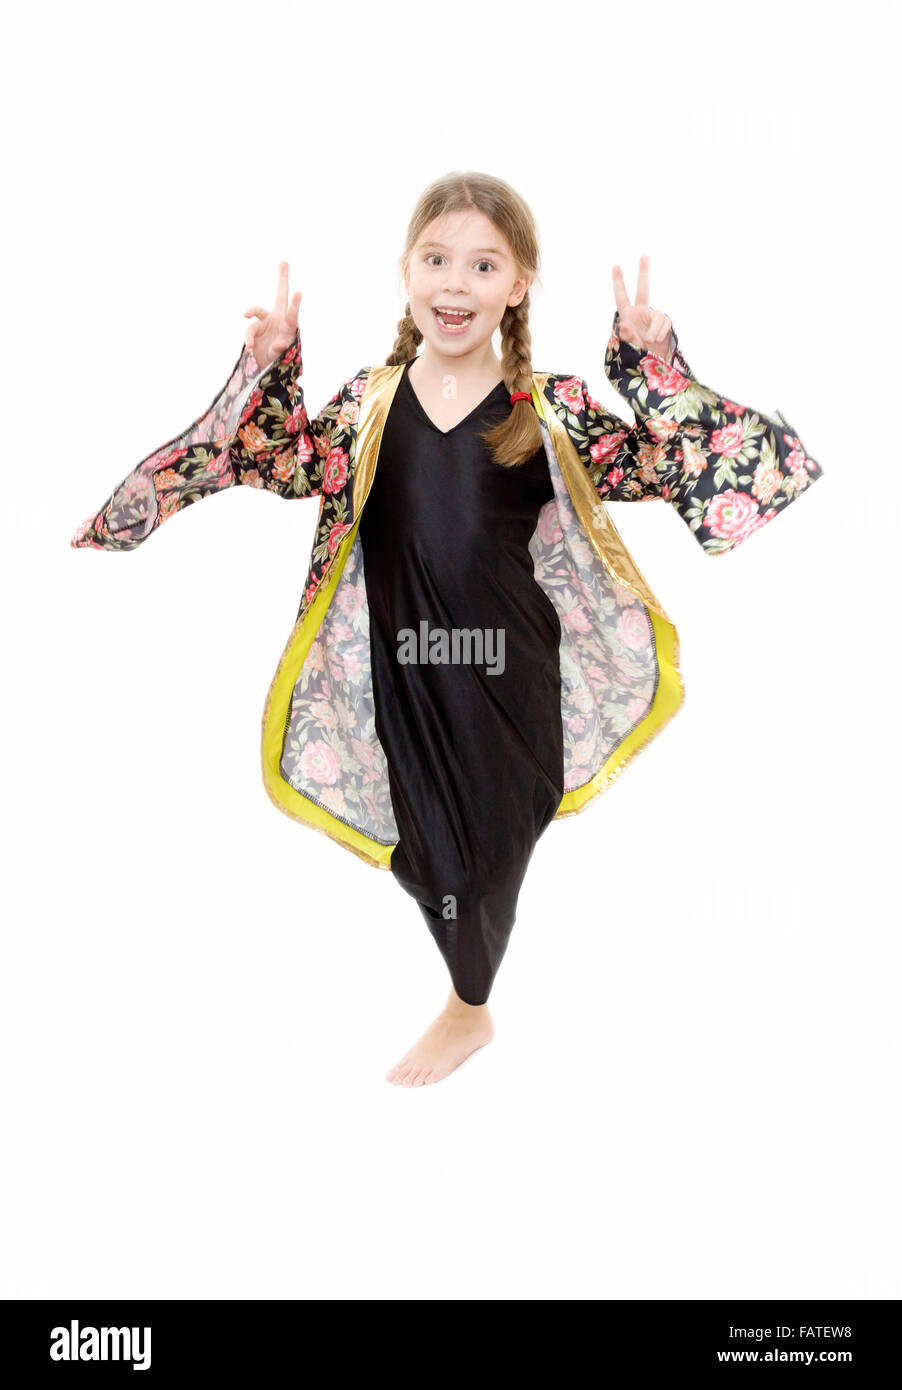 young girl playing dress up wearing a Japanese kimono and showing the victory sign on white background Stock Photo